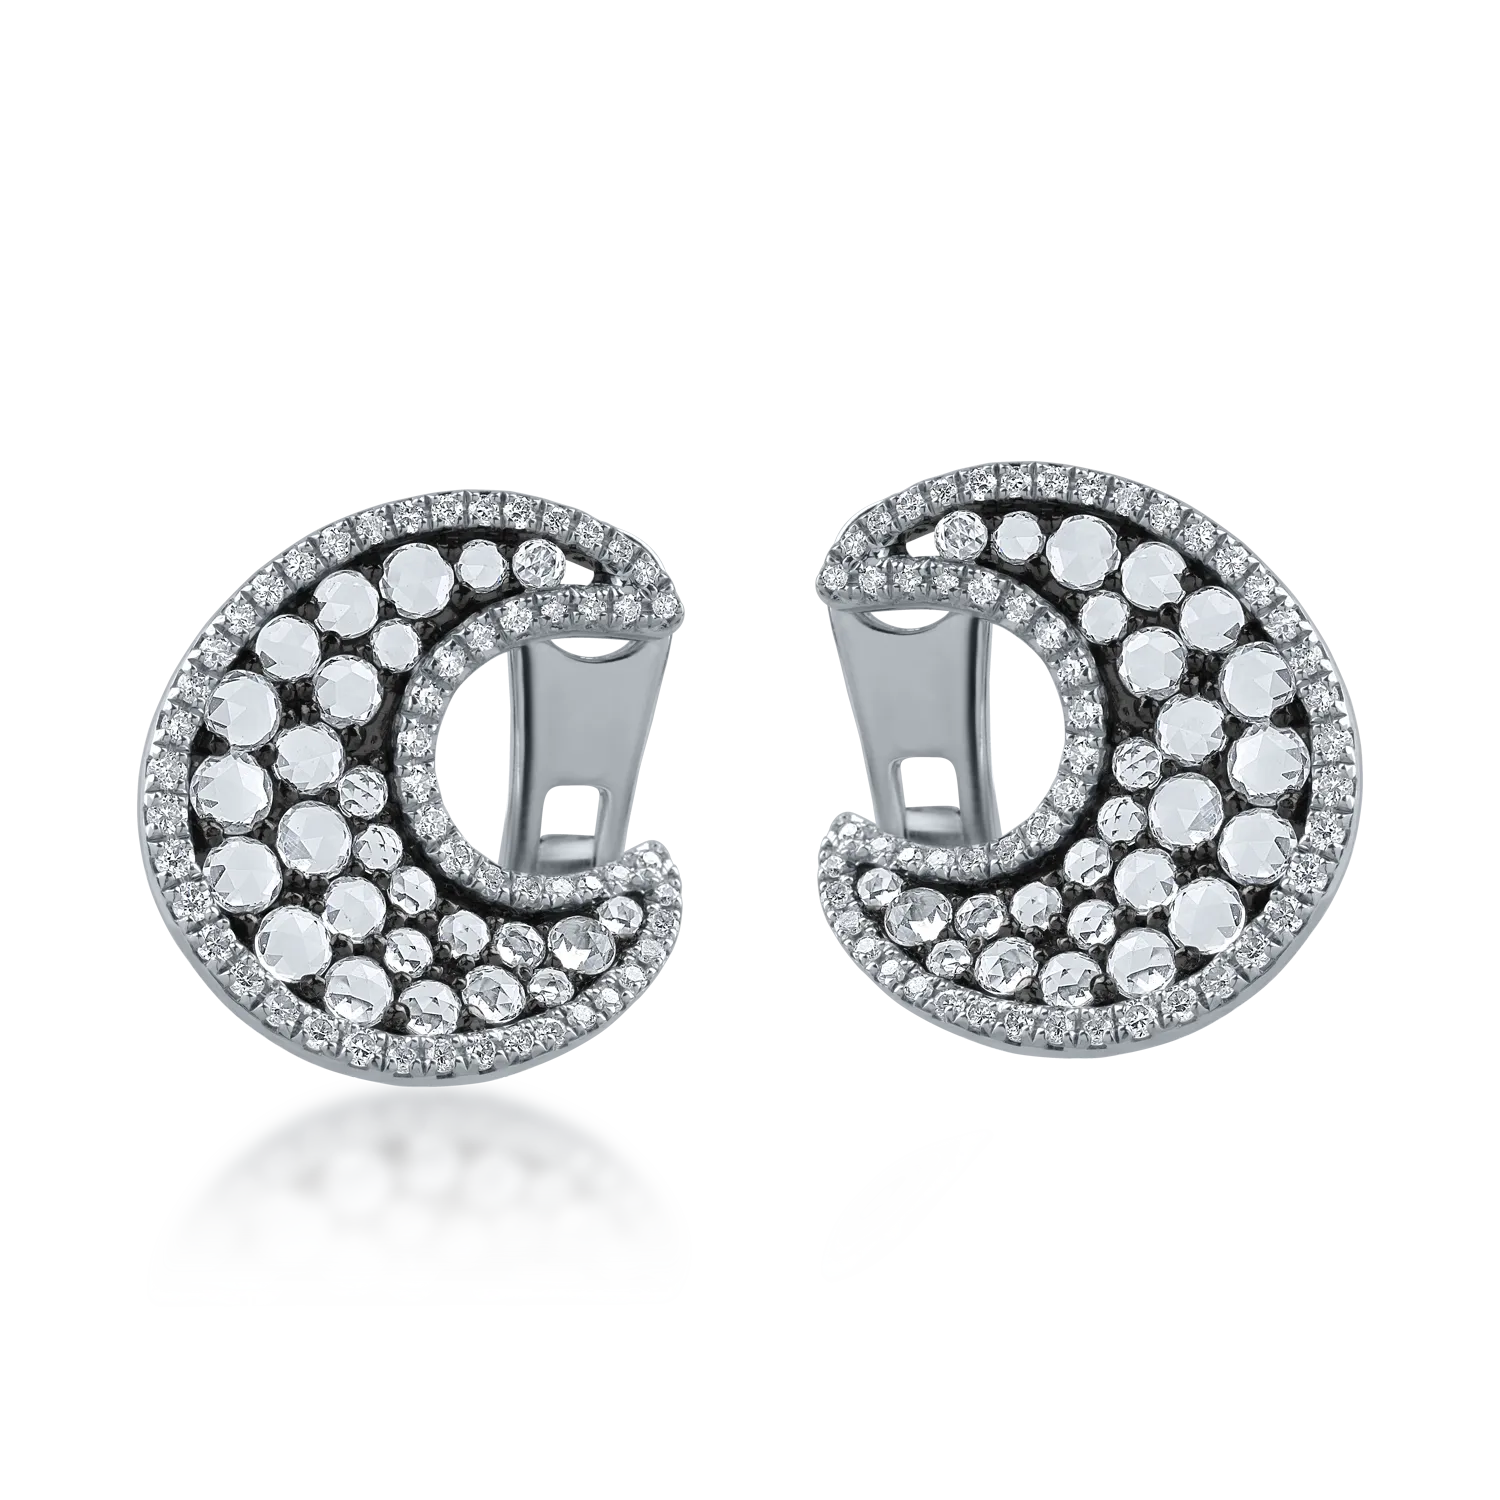 White gold half moon earrings with 1.35ct white sapphires and 0.36ct diamonds